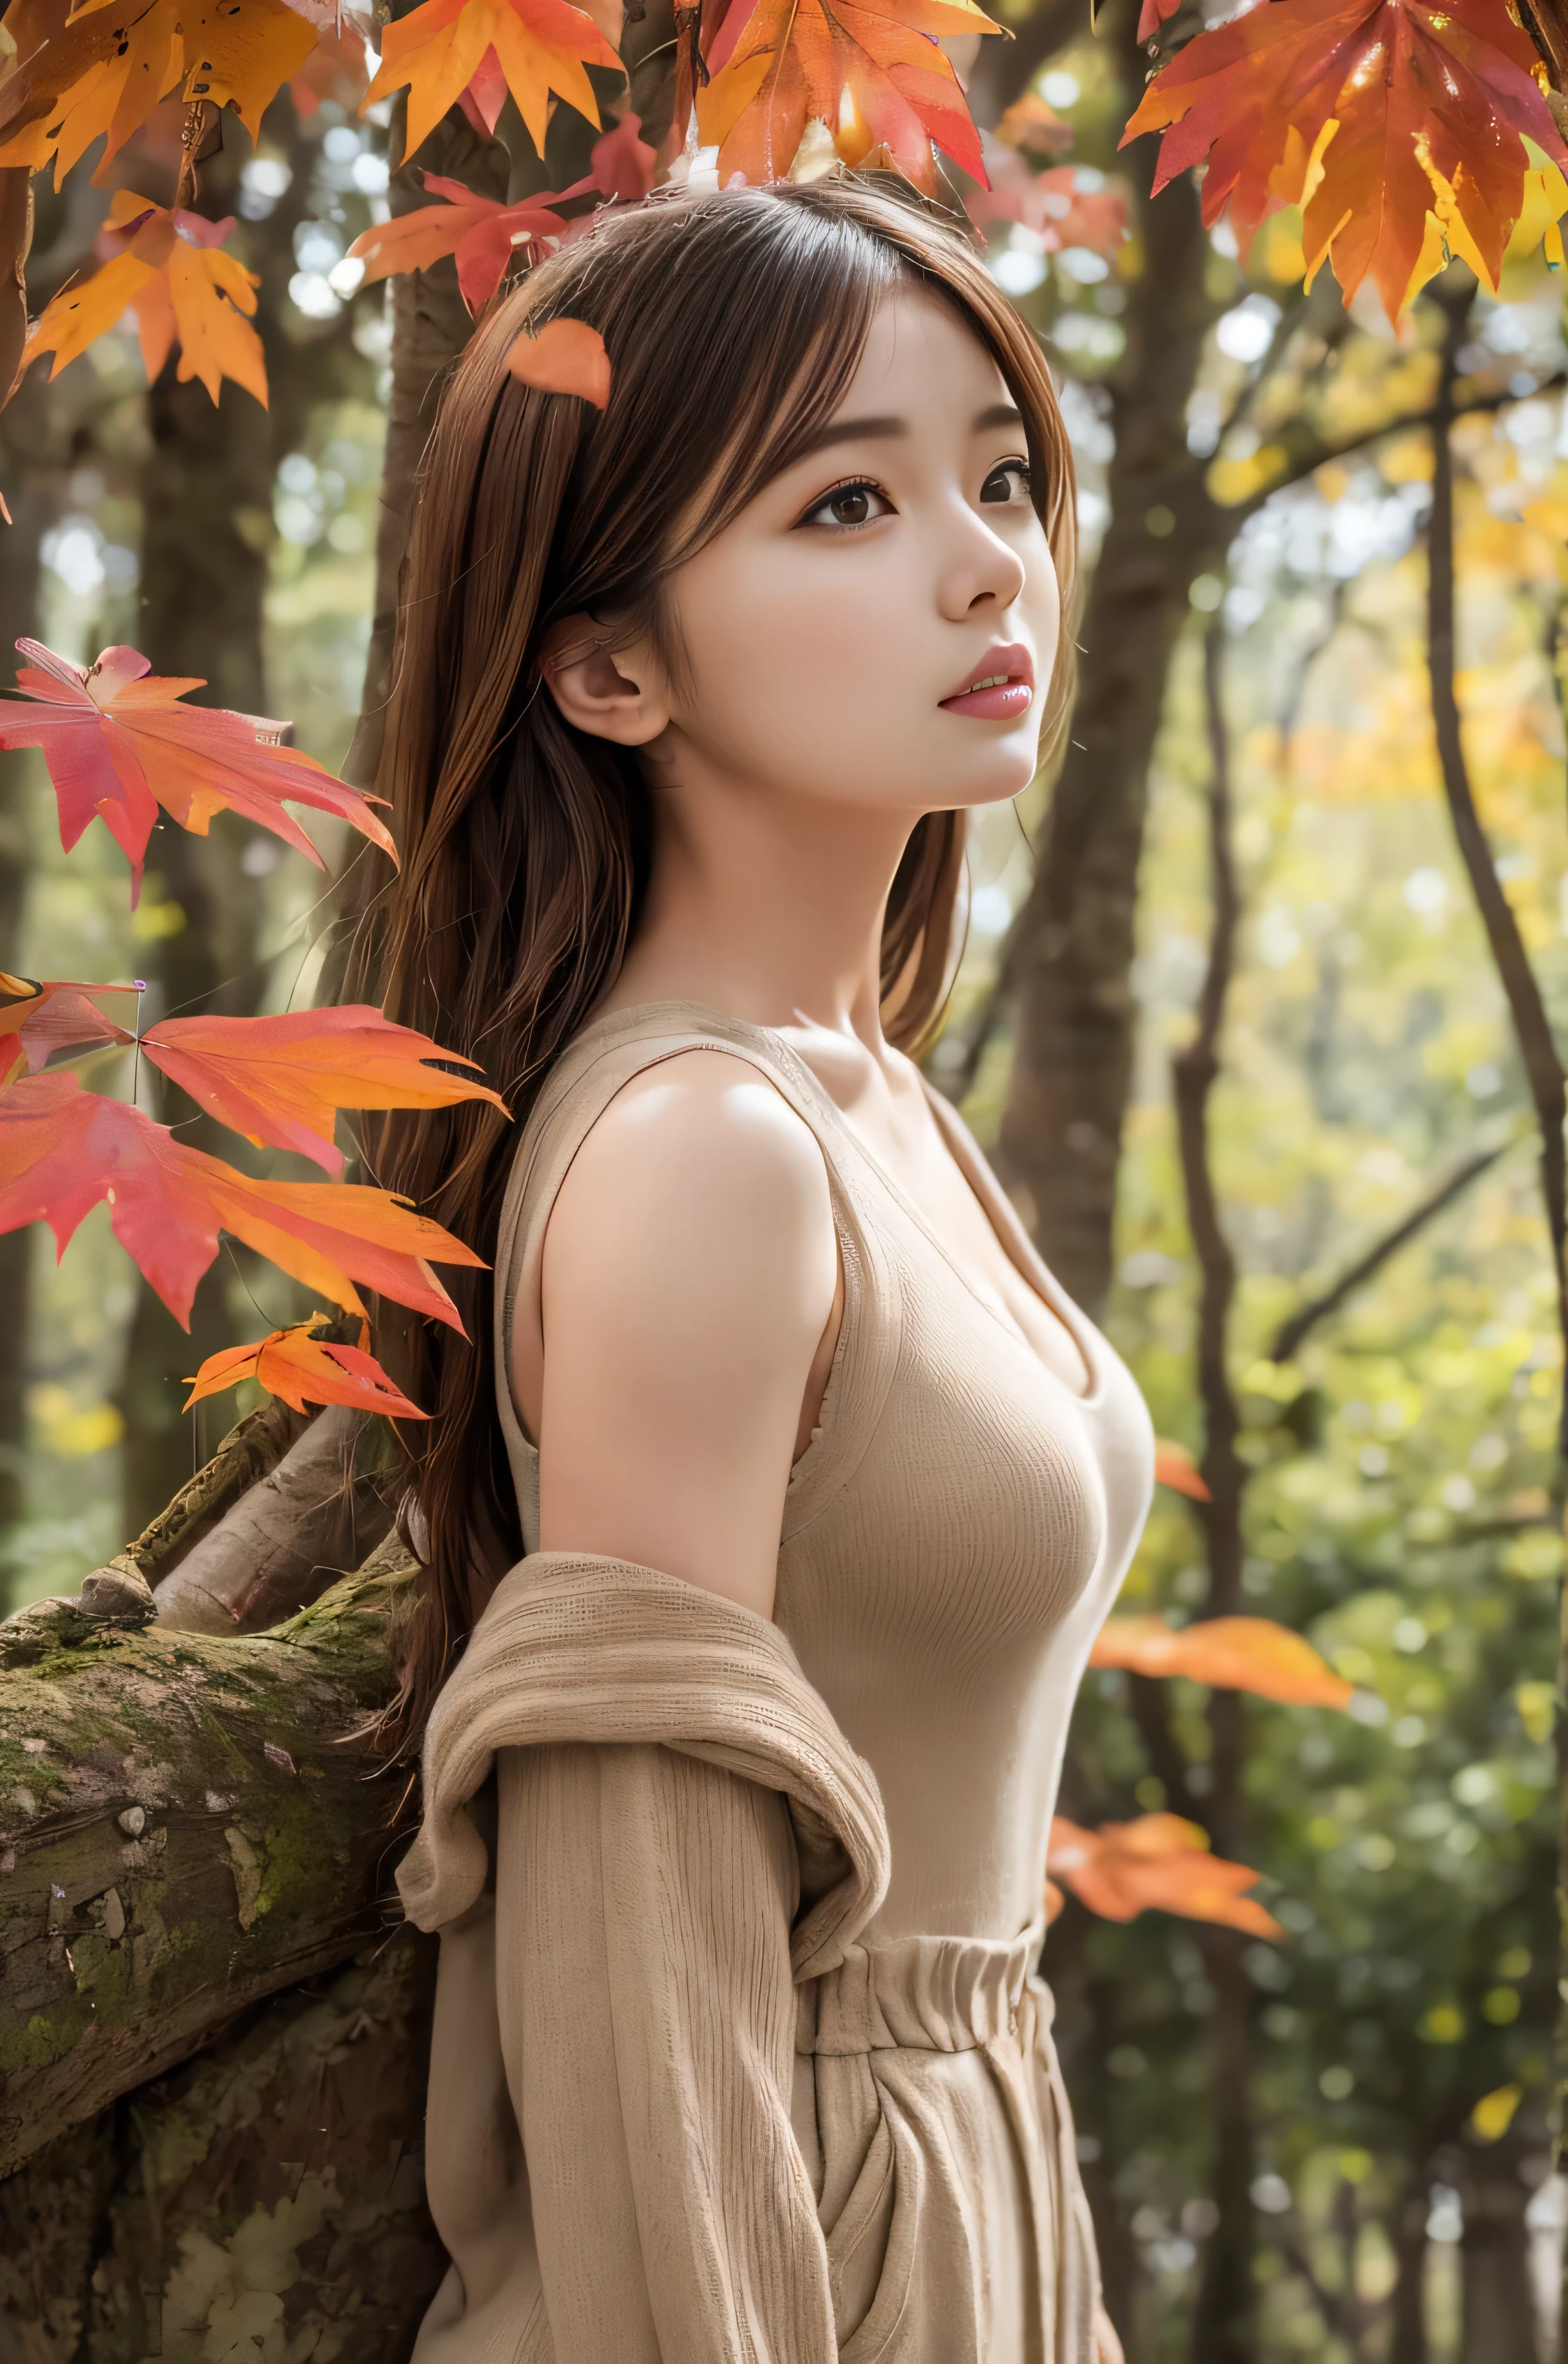 Masseter muscle area、sottle Woman、shortcut、Natural color clothes、Natural look、highest quality、Ultra-detailed、High quality details、８ｋ、autumn leaves:1.5、deep autumn forest、Tree leaking day、silence